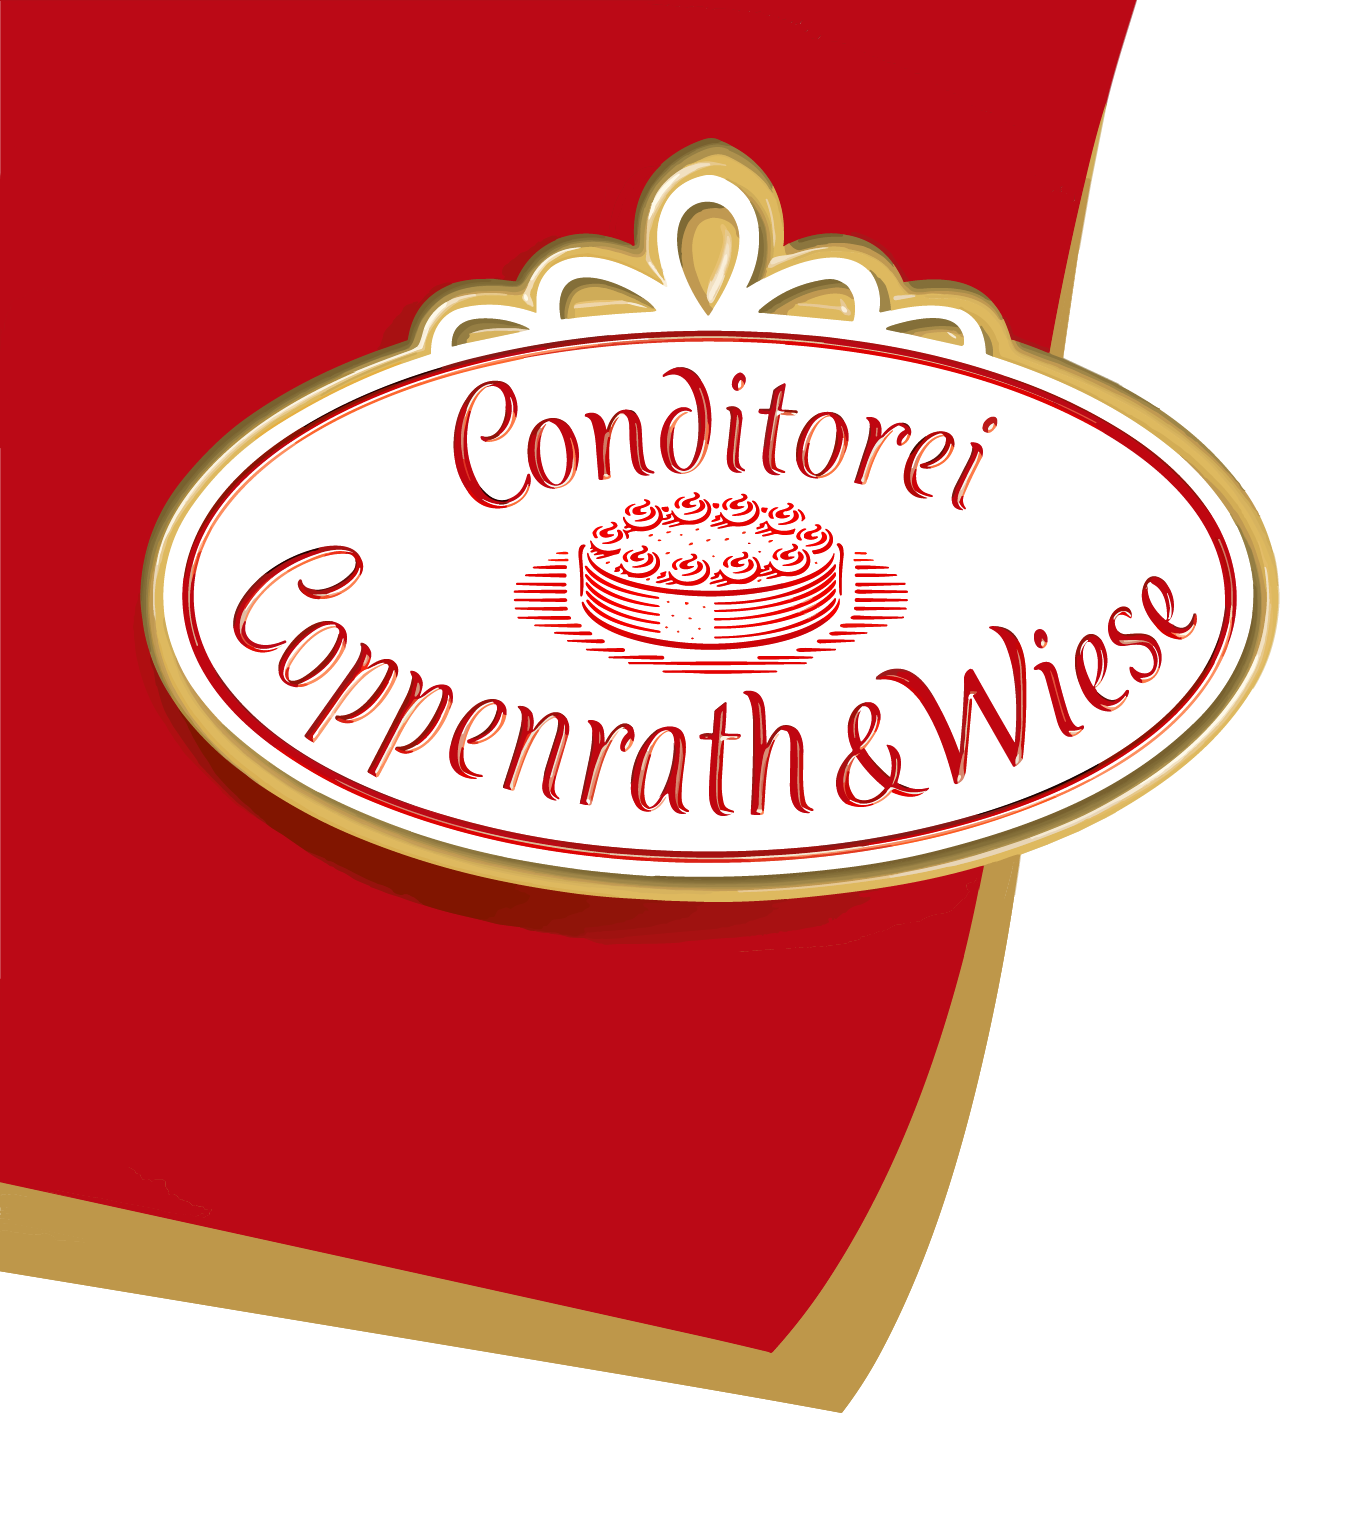 Coppenrath & Wiese new